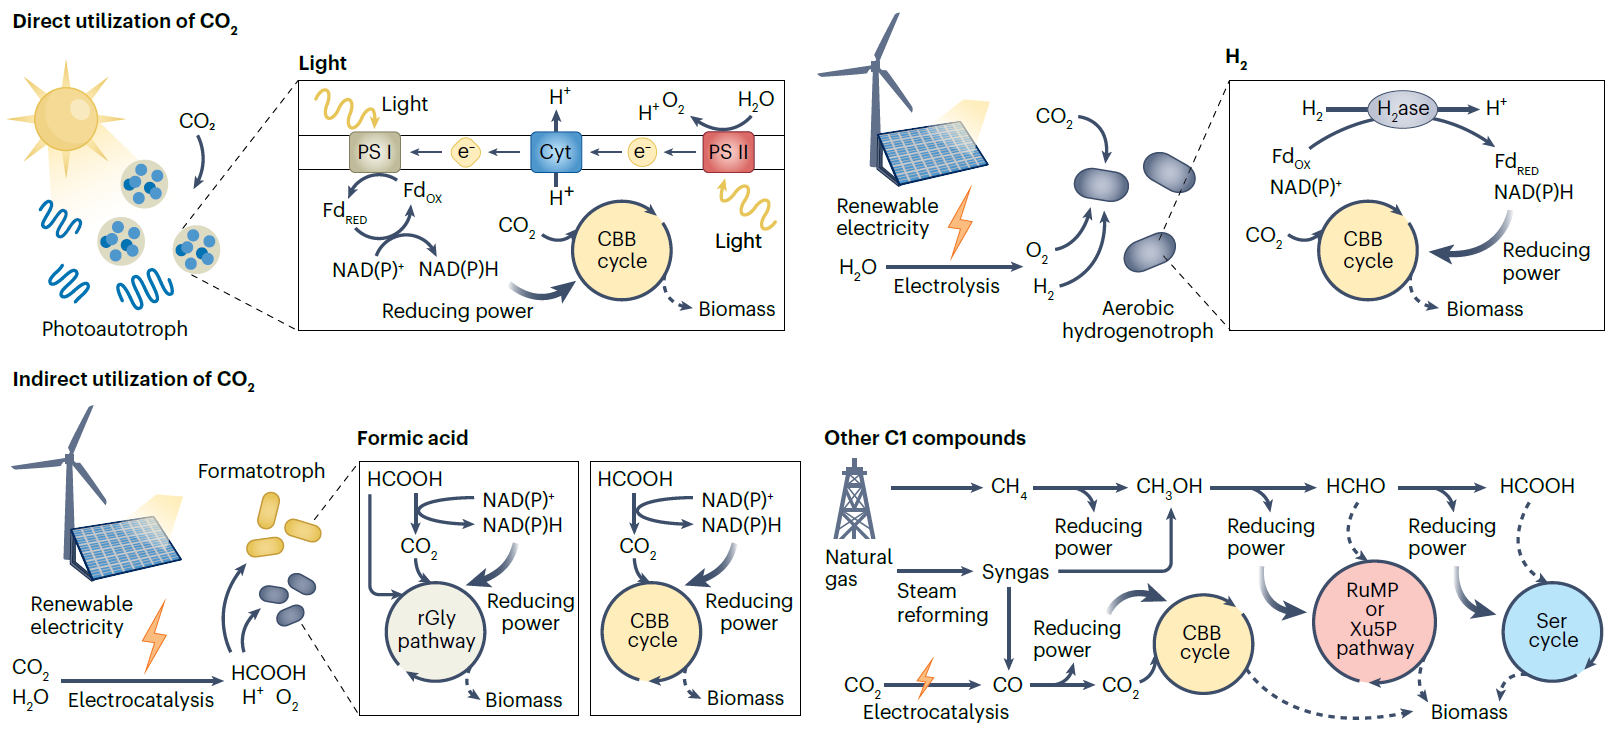 Figure 1. Schematic diagram portraying various microbial biomass production strategies utlizing sustainable feedstocks